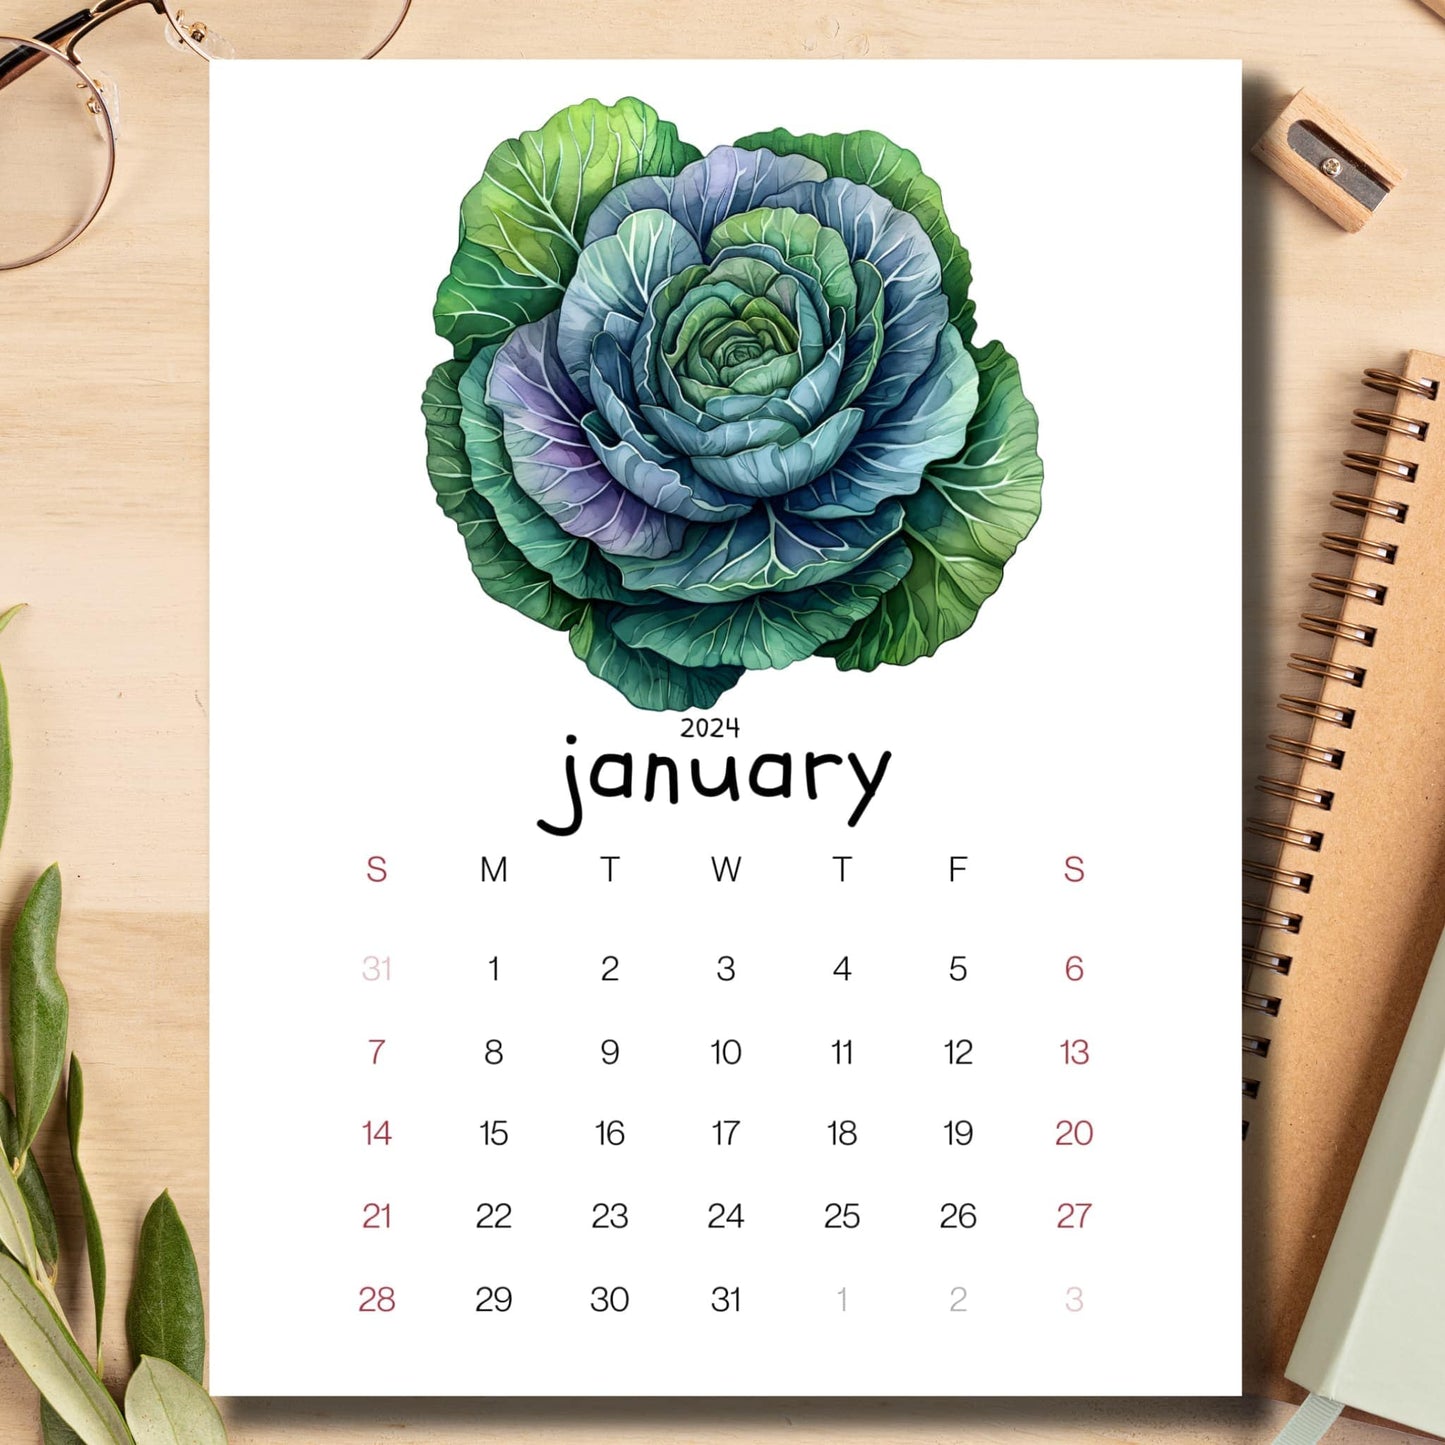 January 2024 ornamental cabbages calendar laid on a light brown desk with school supplies like a notebook, pencil, and sharpener.